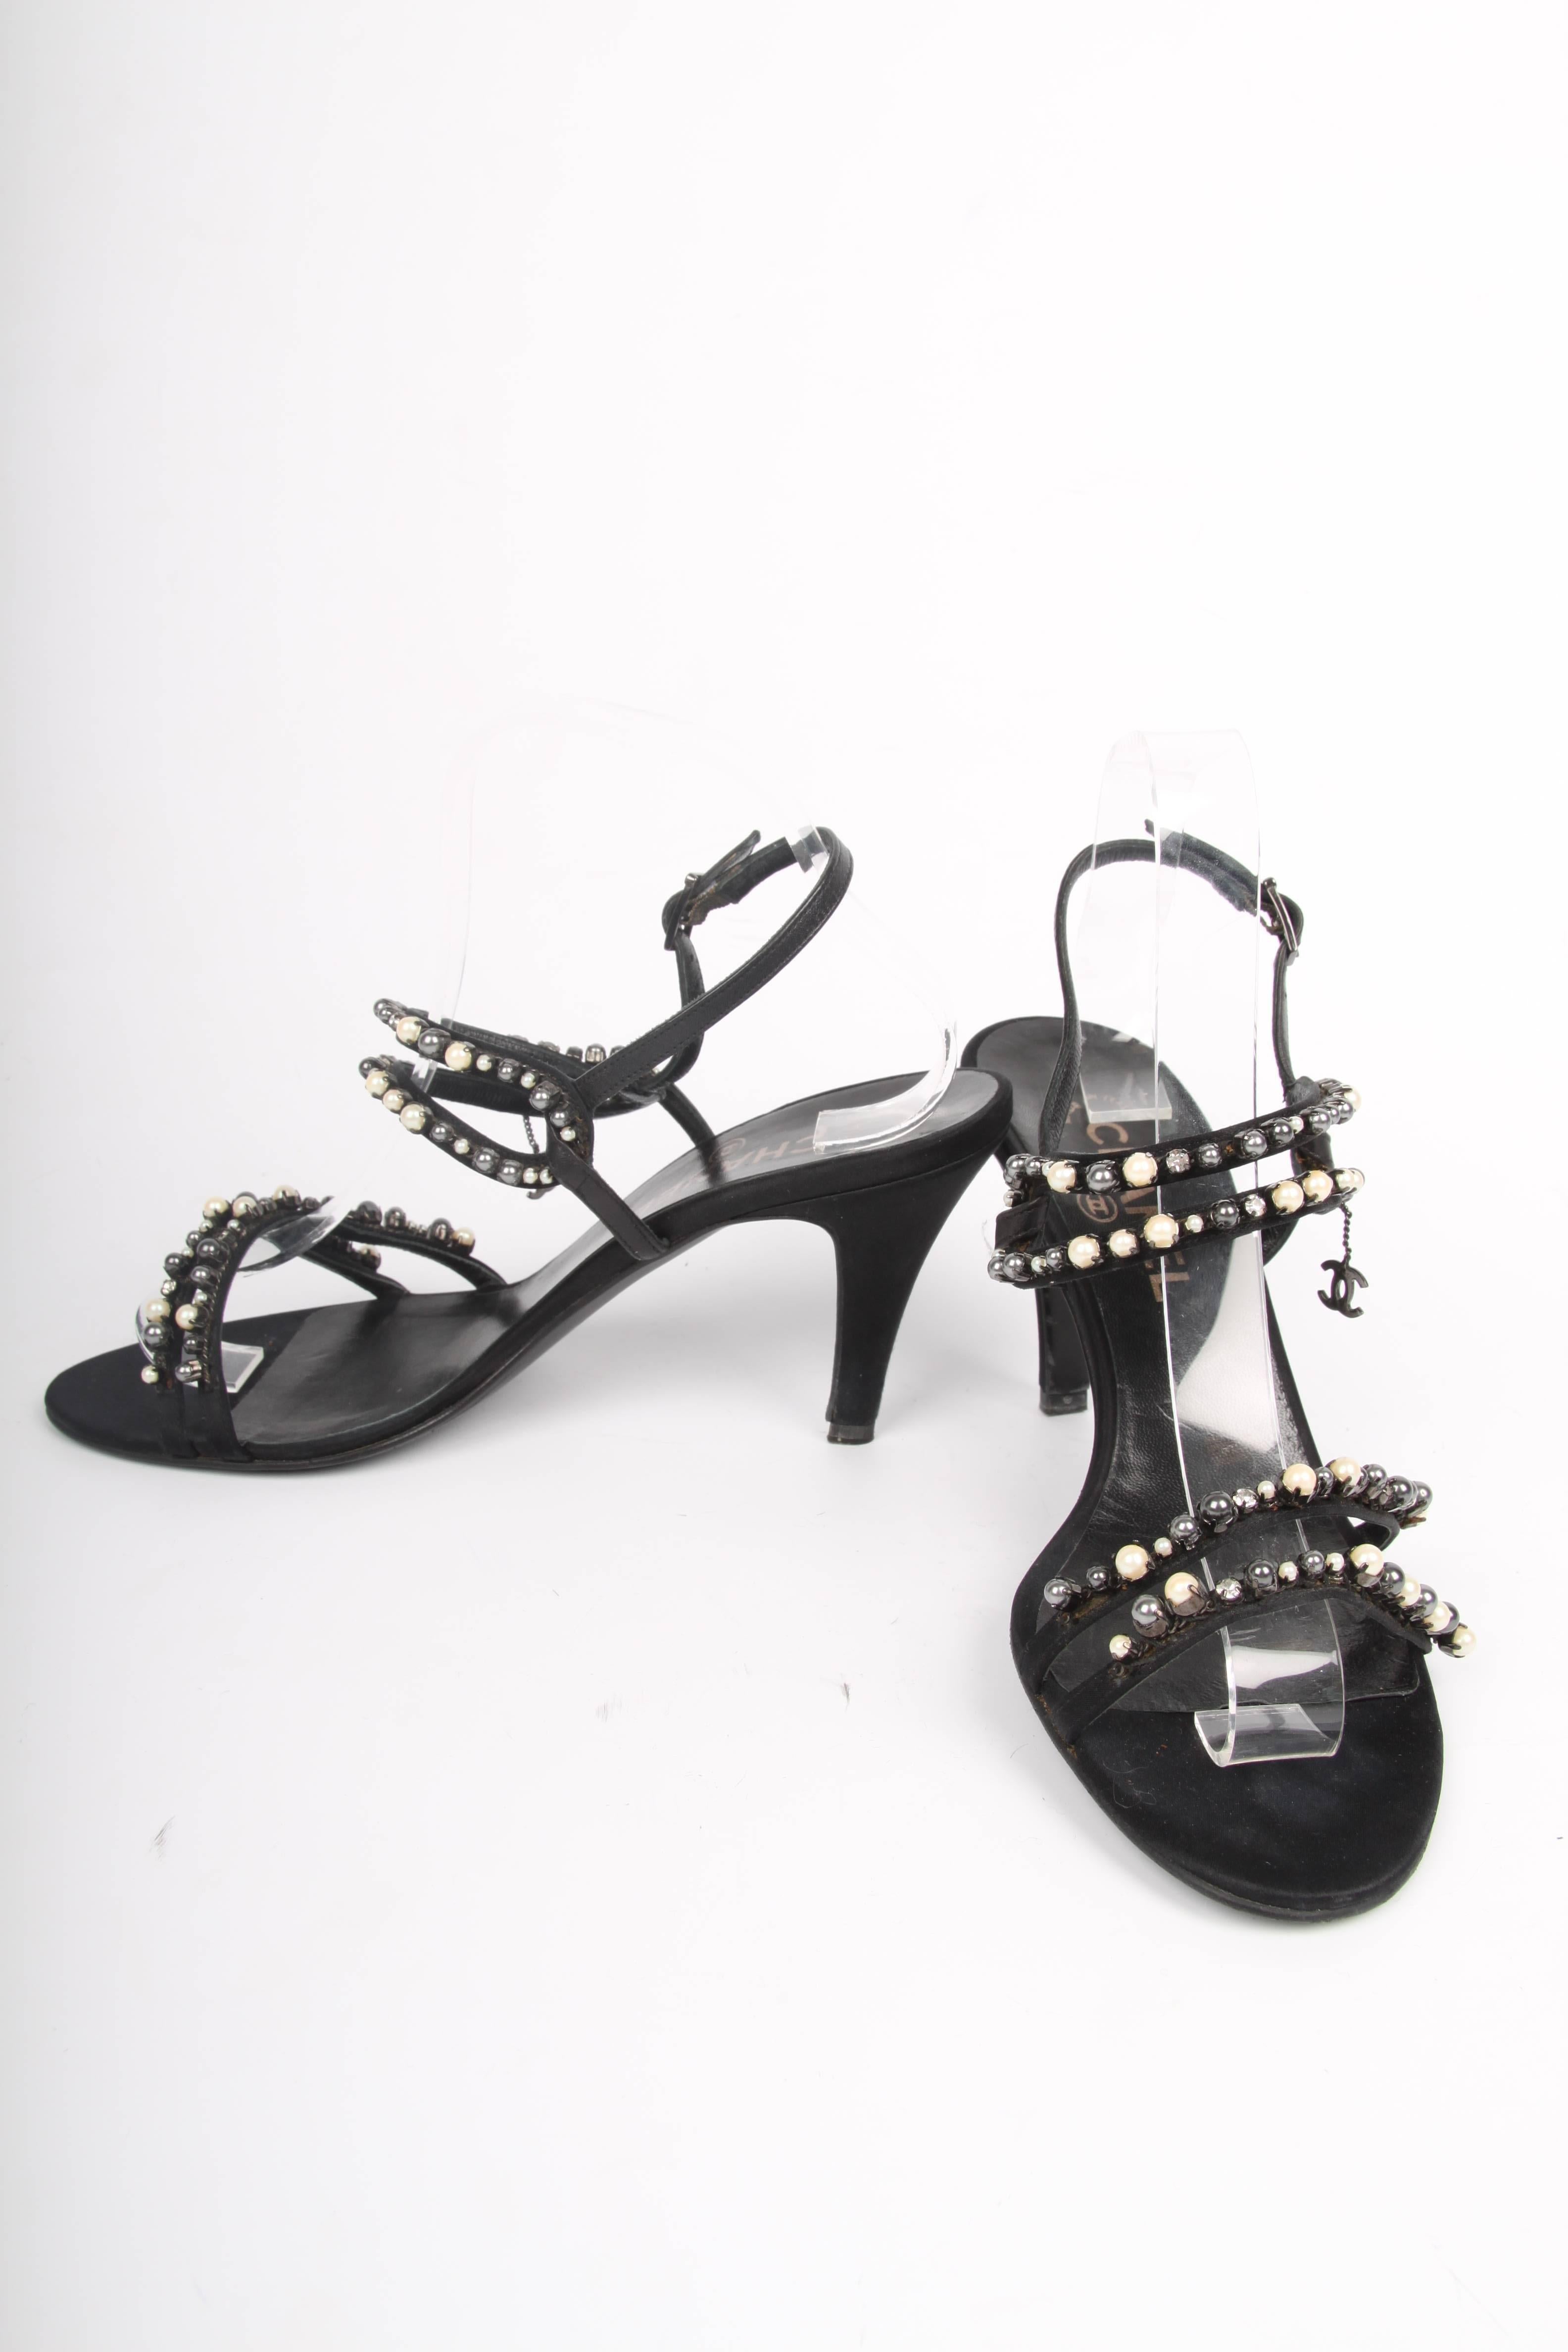 Very pretty sandals by Chanel, these are adorable!

The heel measures 10 centimeters, no platform. Four strap in total cross the foot; all embellished with pearls in different sizes and colors and a crystal here and there. A CC logo dangle on one